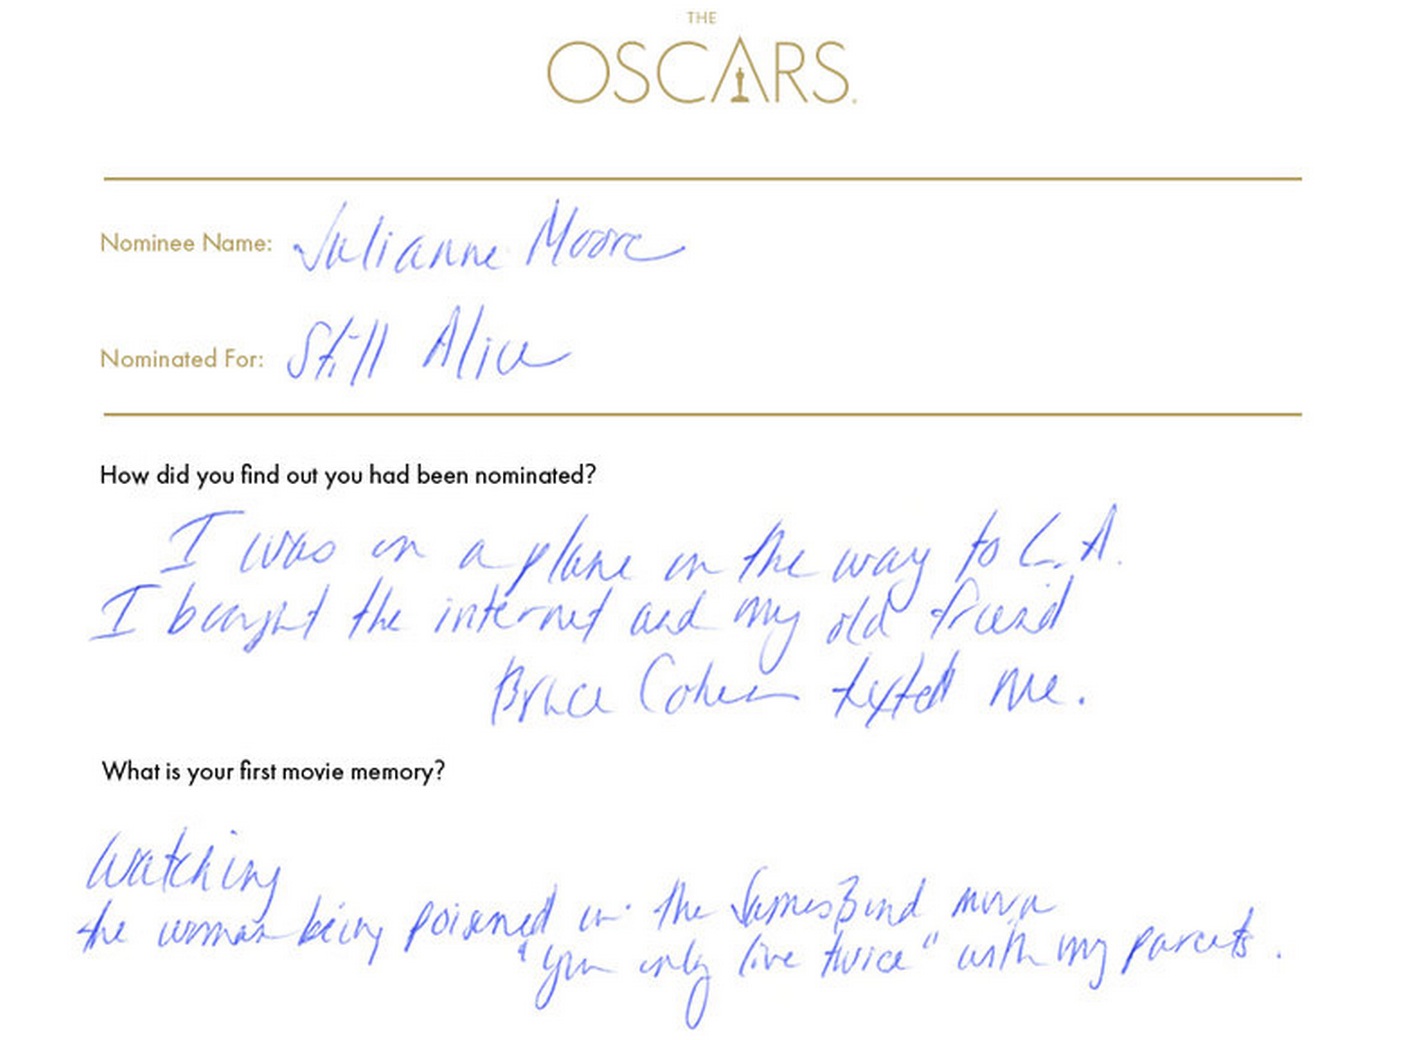 52 of the Oscar nominees, in their own words